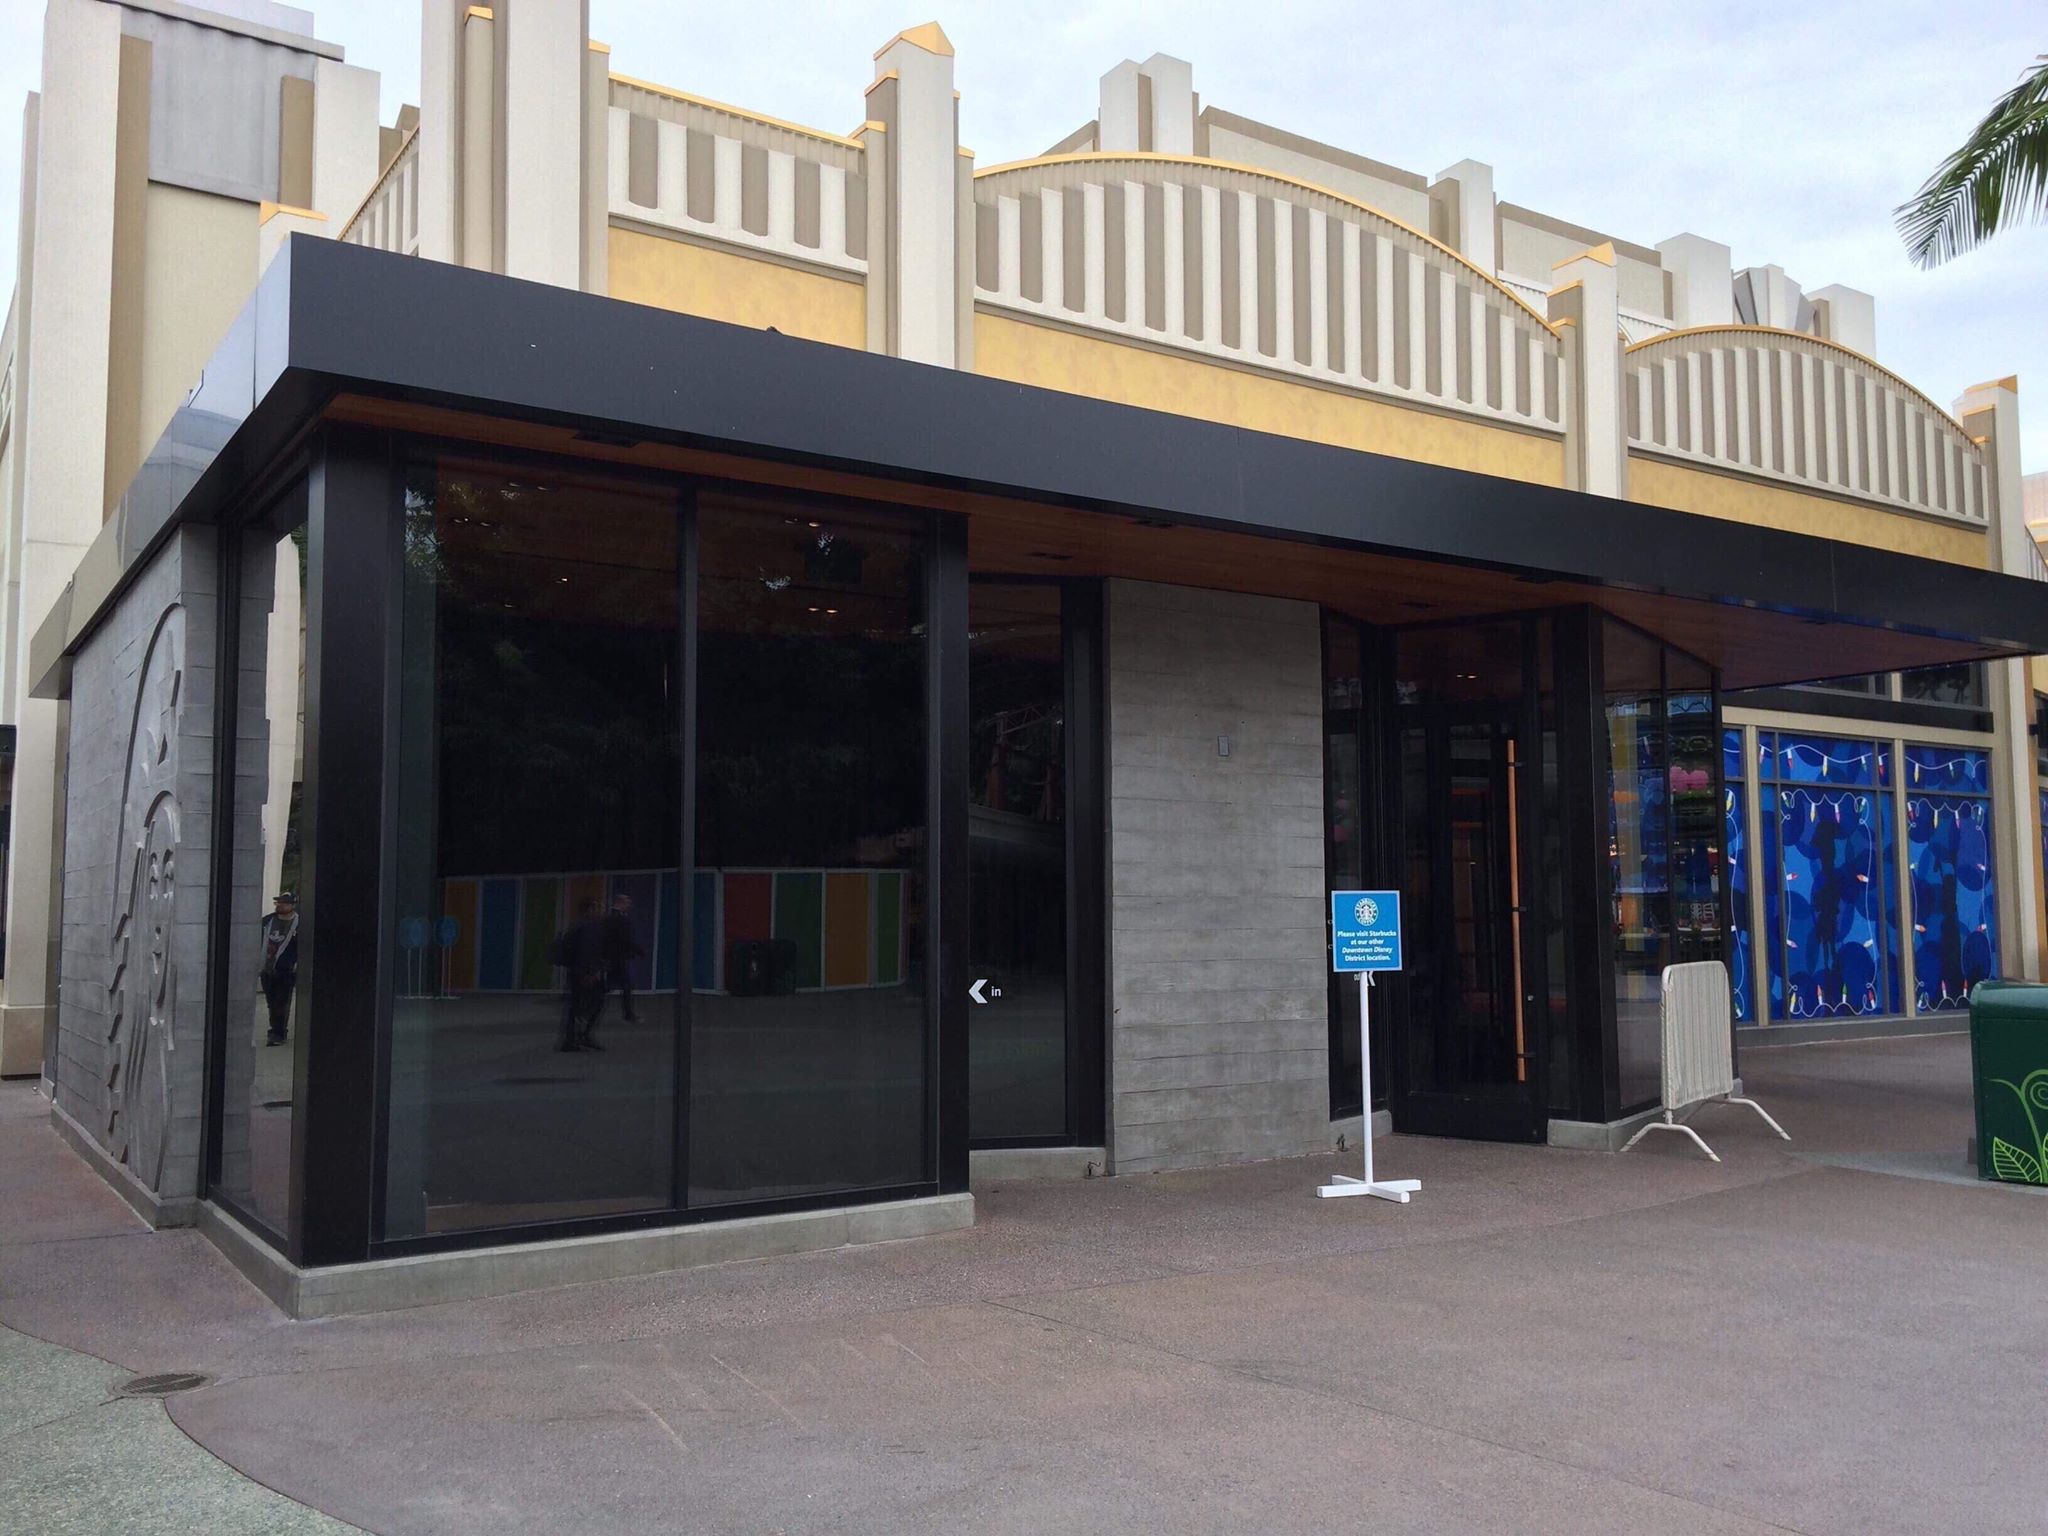 Calling all Coffee Lovers – 2nd Starbucks Returns to Downtown Disney